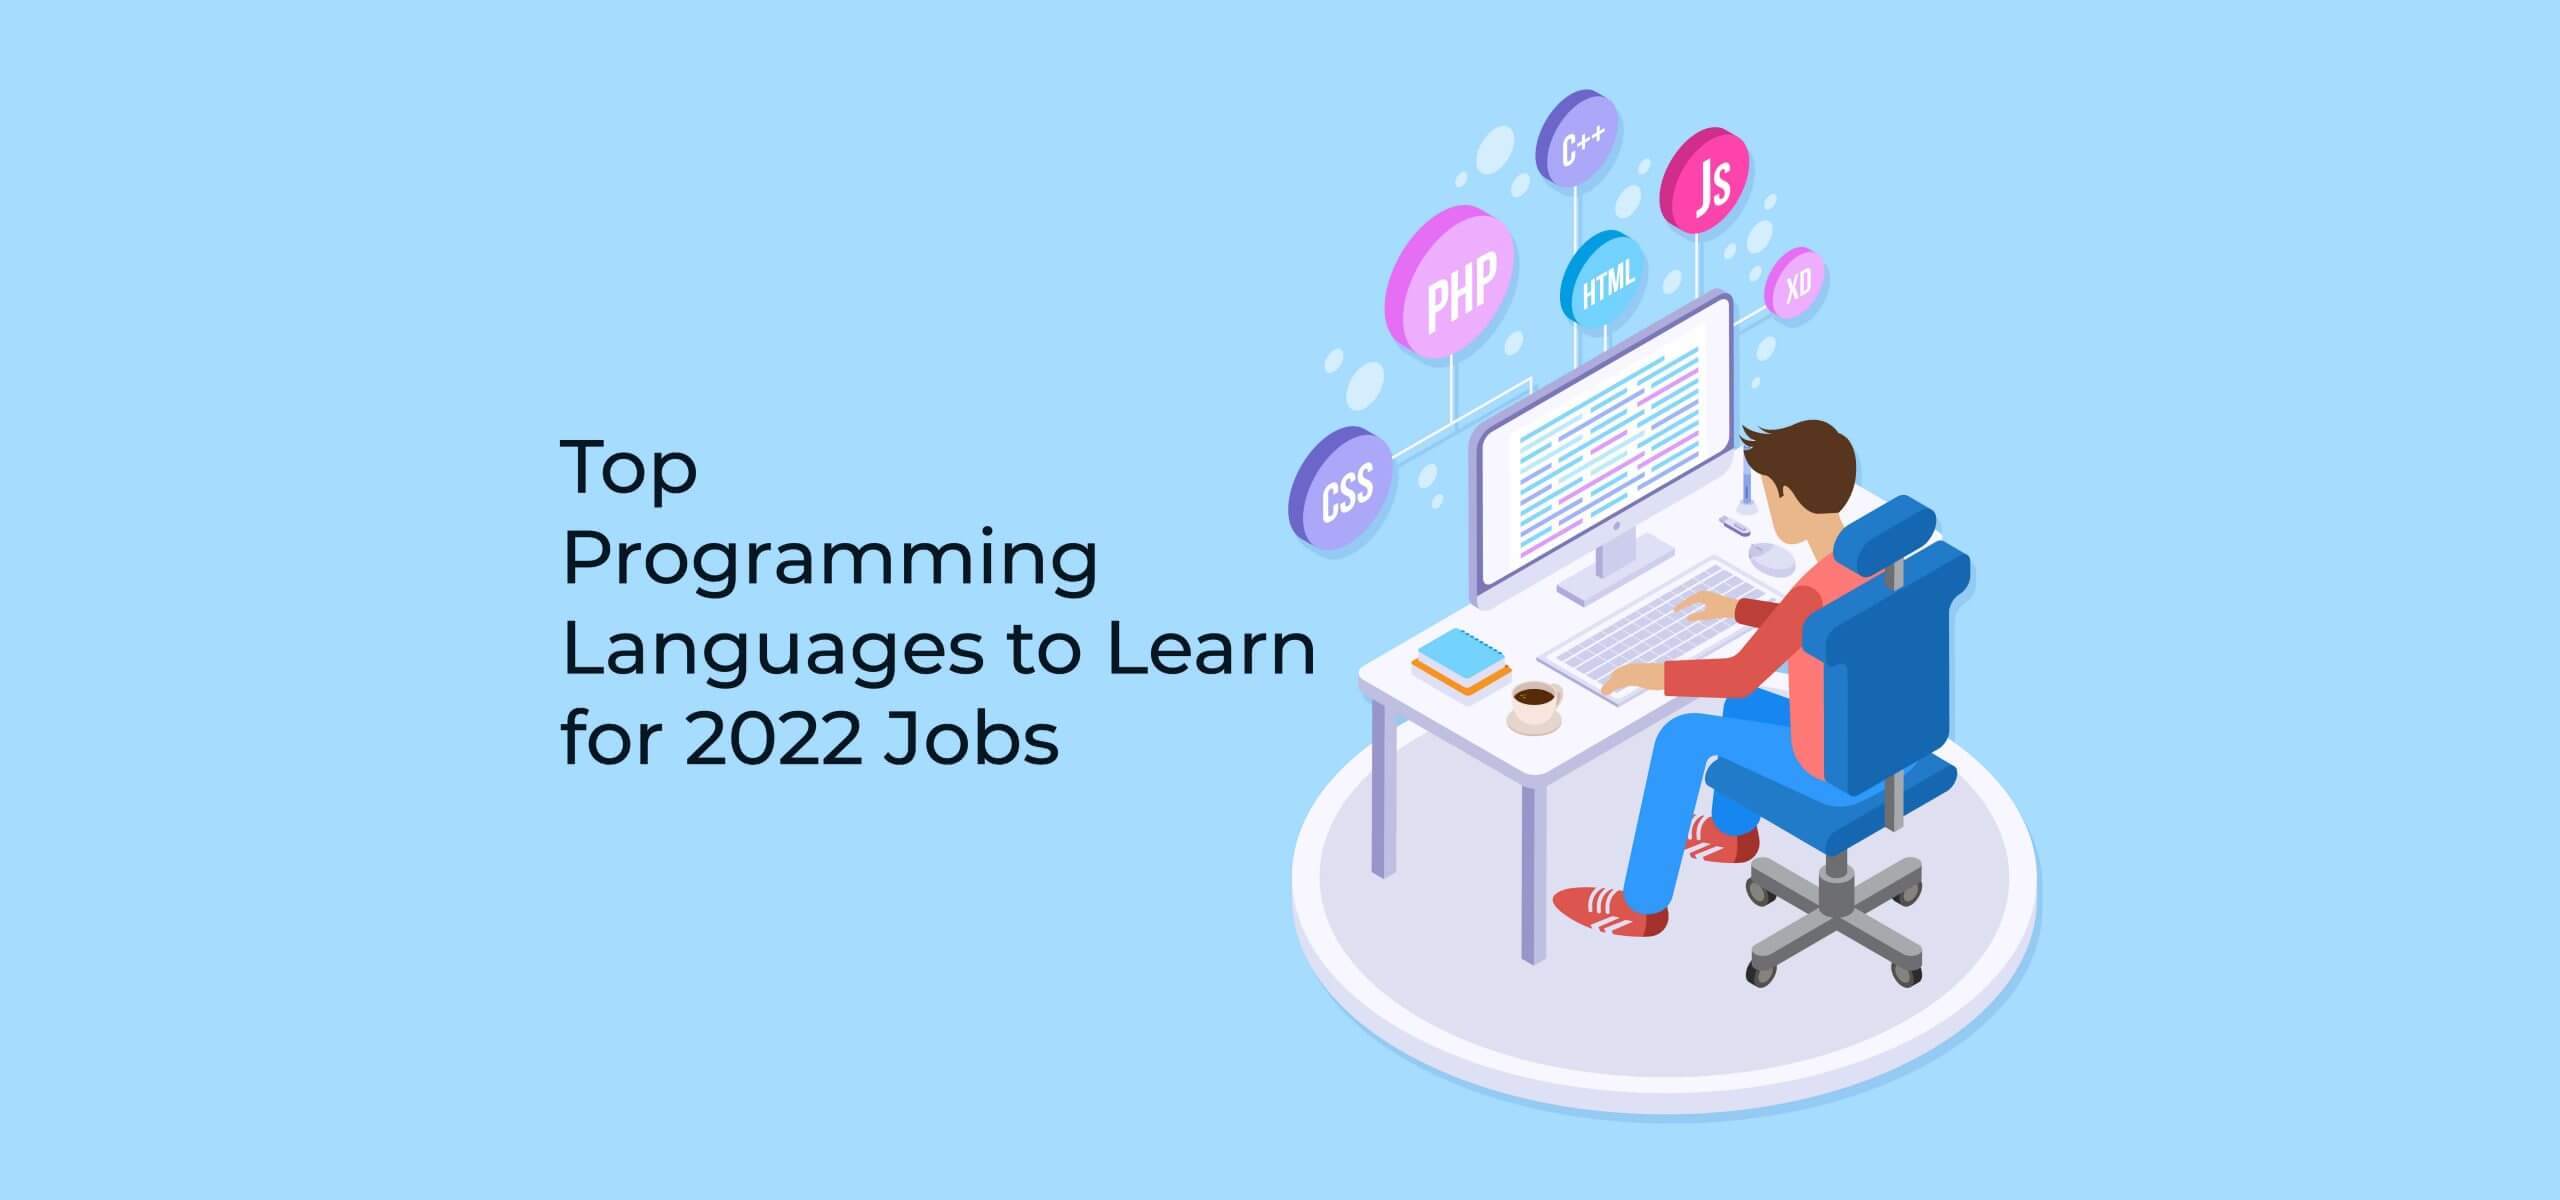 Top Programming Languages to Learn for 2022 Jobs